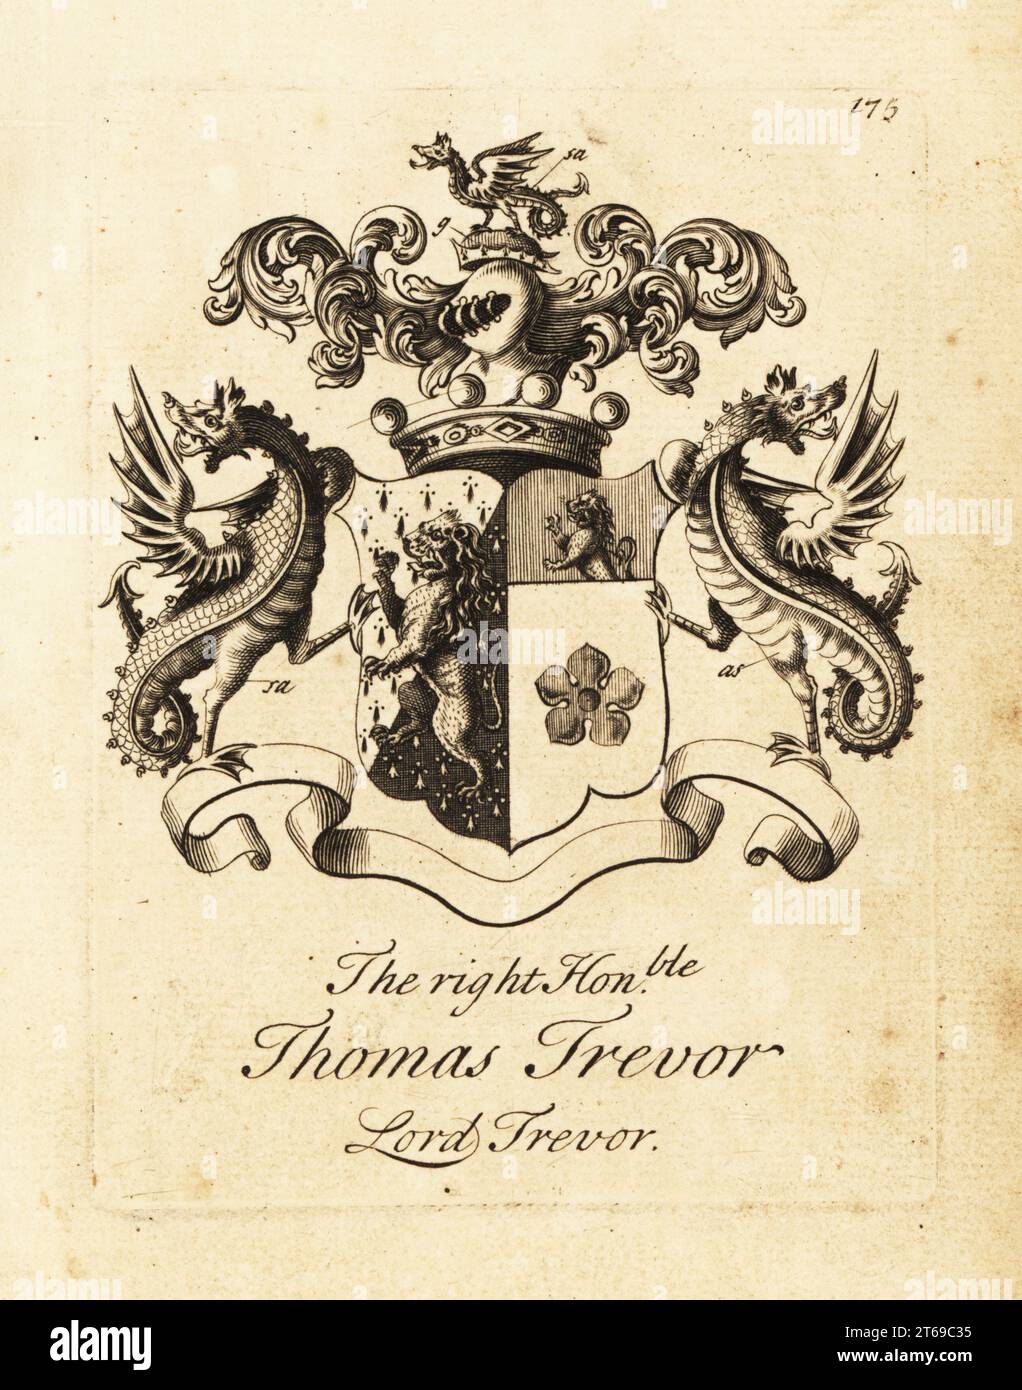 Coat of arms of the Right Honourable Thomas Trevor, Lord Trevor, 1st Baron Trevor, 1658-1730. Copperplate engraving by Andrew Johnston after C. Gardiner from Notitia Anglicana, Shewing the Achievements of all the English Nobility, Andrew Johnson, the Strand, London, 1724. Stock Photo